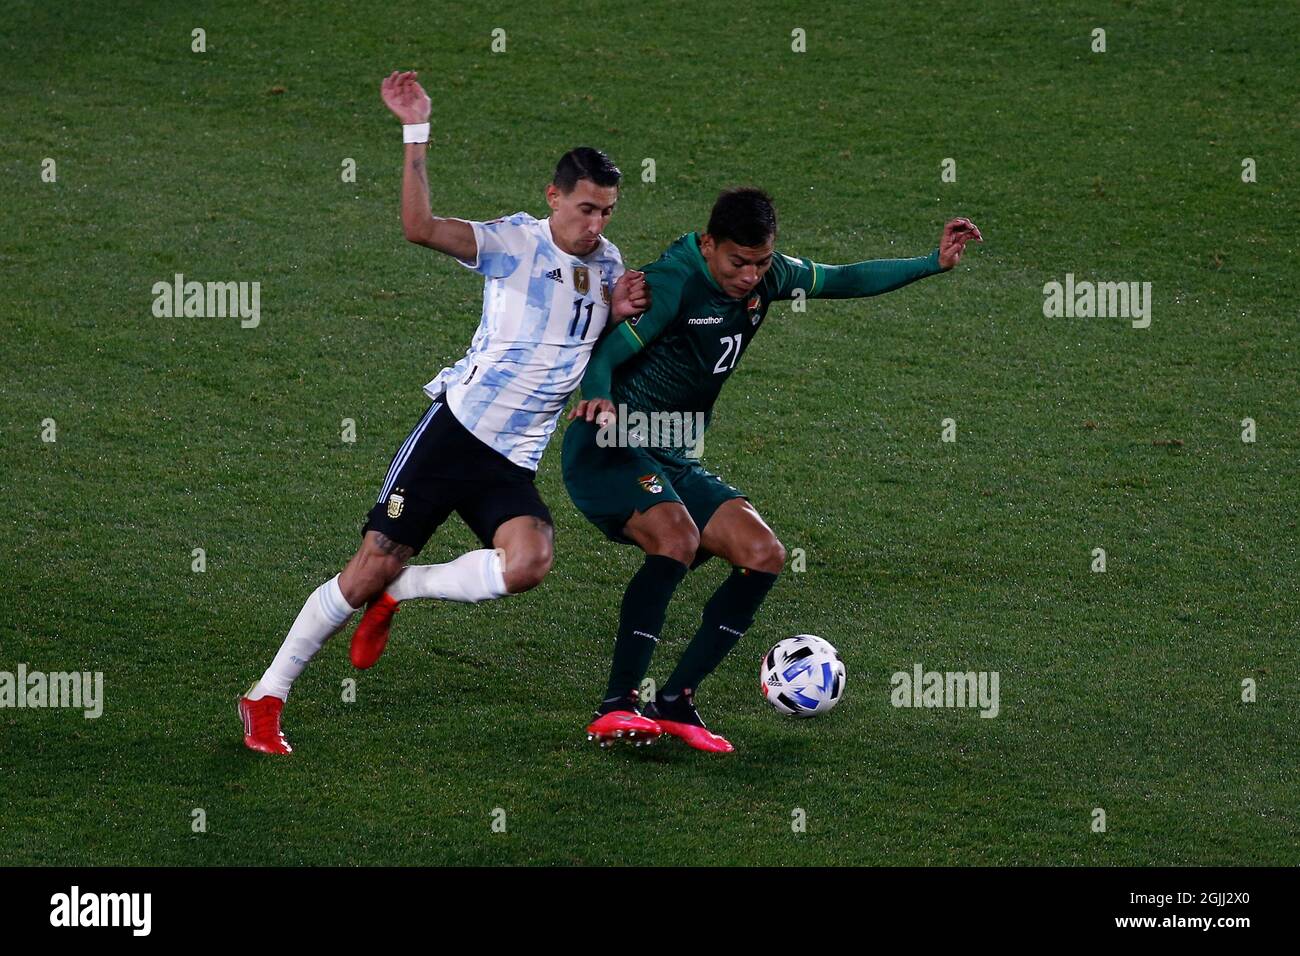 Buenos Aires, Argentina. 09th Sep, 2021. BUENOS AIRES - SEPTEMBER 9: Forward Angel Di María (11) of Argentina fights for the ball with defender J. Sagredo (21) of Bolivia during a match between Argentina and Bolivia as part of South American Qualifiers for Qatar 2022 at Estadio Monumental Antonio Vespucio Liberti on September 9, 2021 in Buenos Aires, Argentina. (Photo by Florencia Tan Jun/PxImages) Credit: Px Images/Alamy Live News Stock Photo